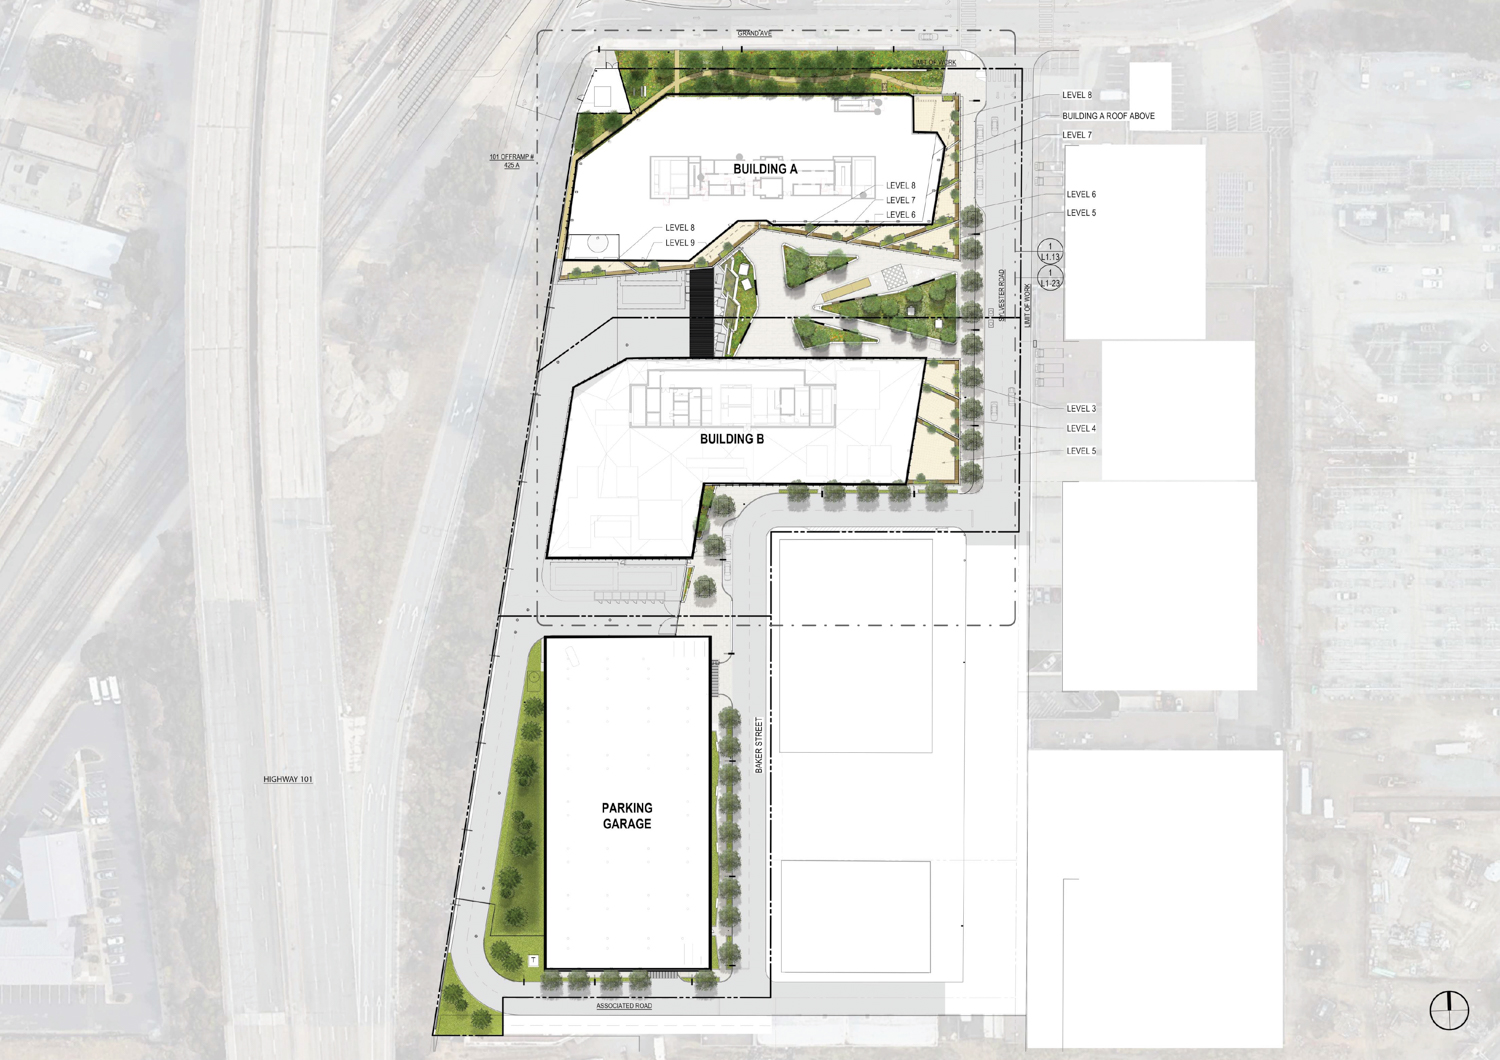 100 East Grand Avenue site map, illustration by ZGF Architects